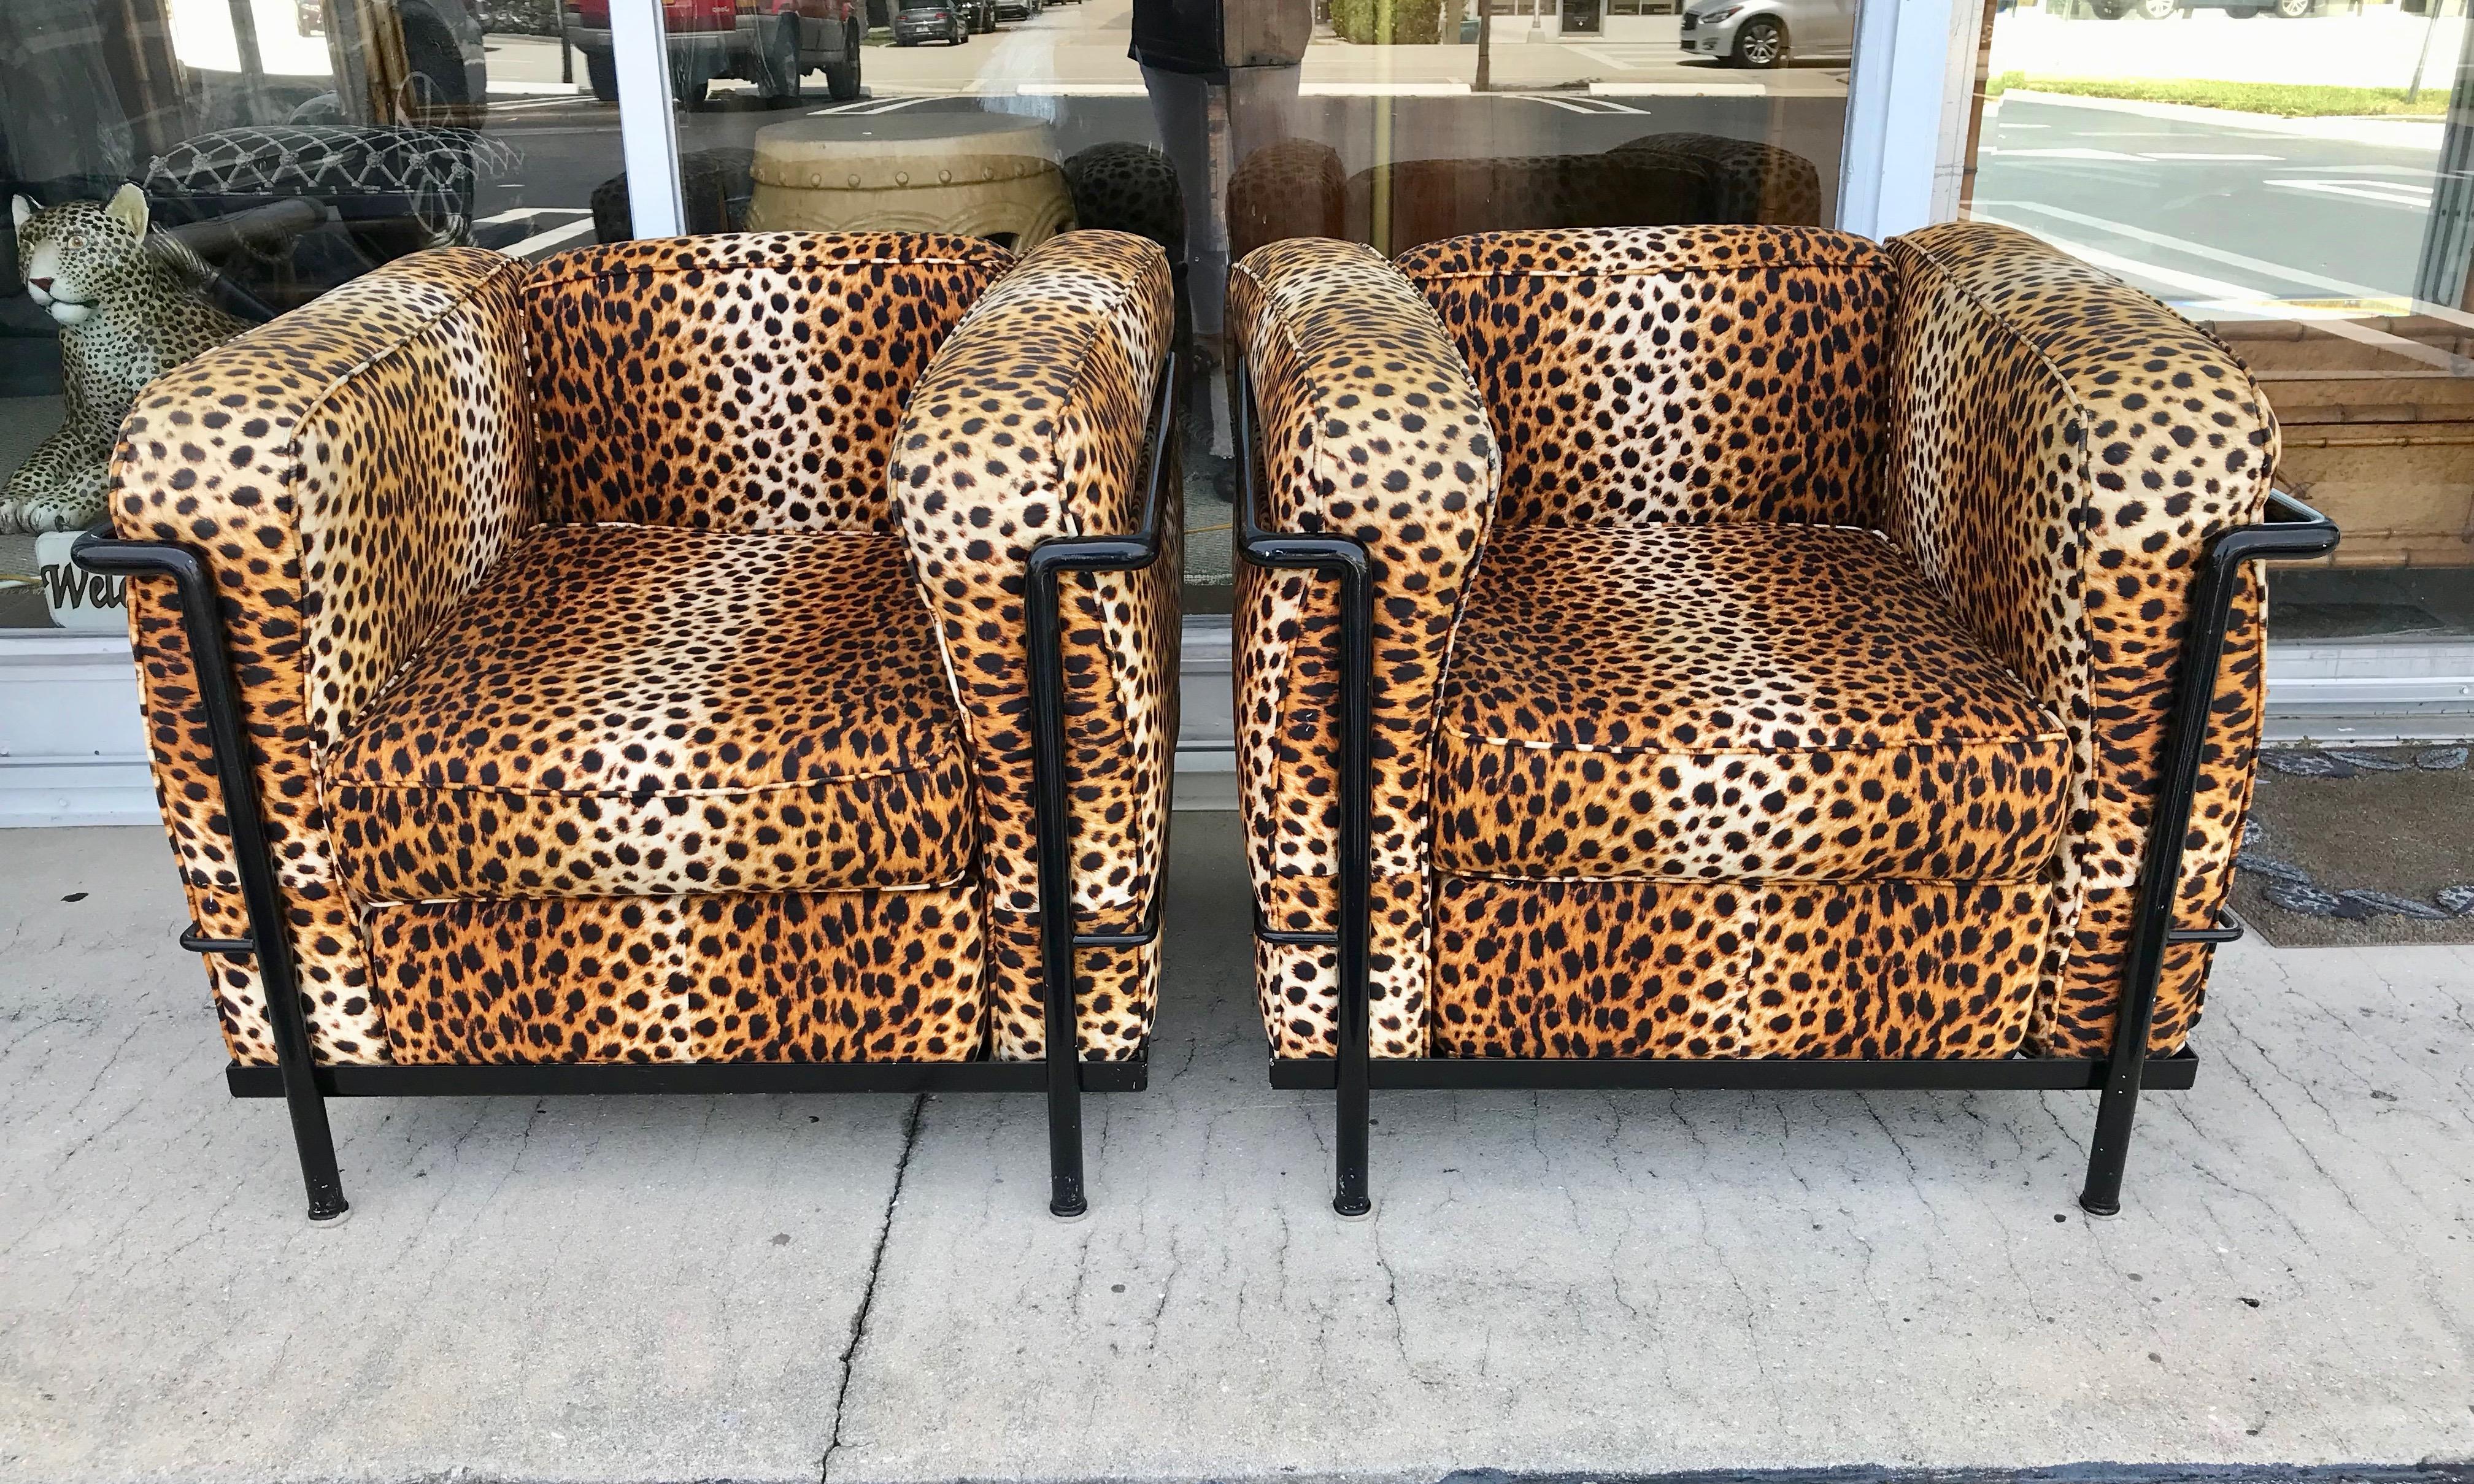 Dramatic faux leopard upholstered chairs in a metal framework.
Visually staning and built for comfort.